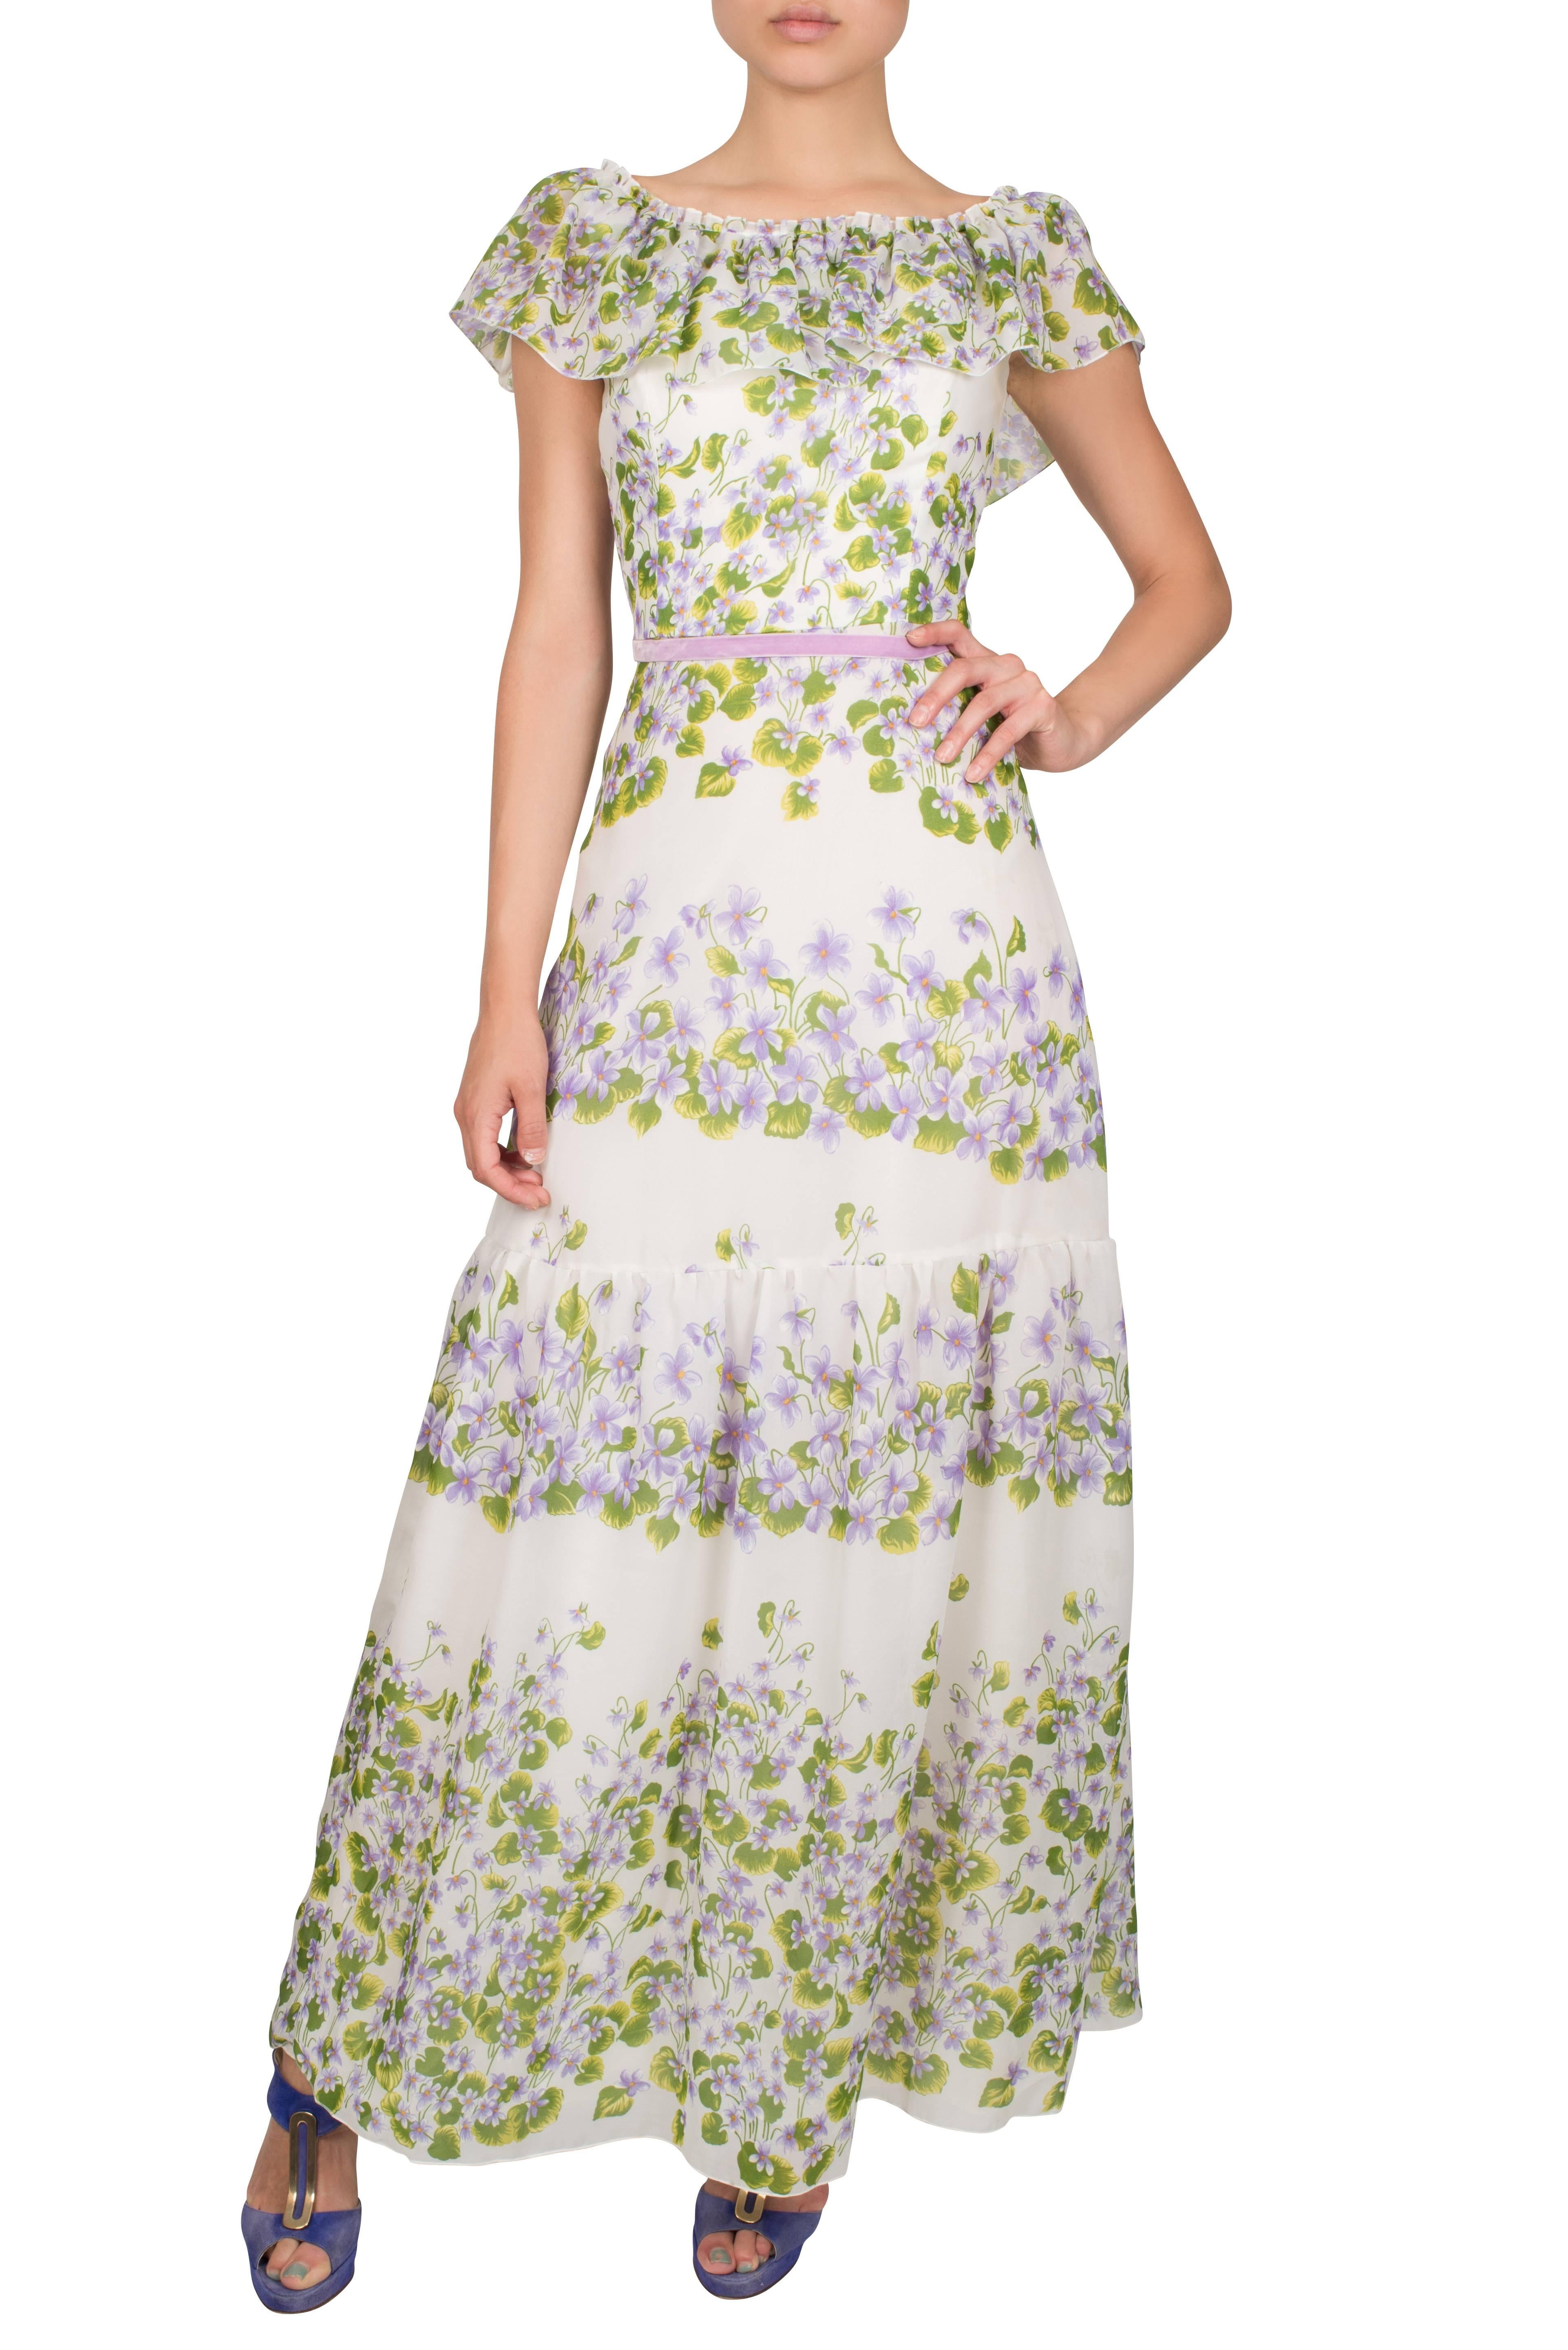 Romantic 1970's tiered off-the-shoulder dress in a soft lavender and green floral pattern. This beautiful dress features a ruffled collar which sits beautifully over the shoulder and a fitted waist that ties up with a thin lavender velvet ribbon.